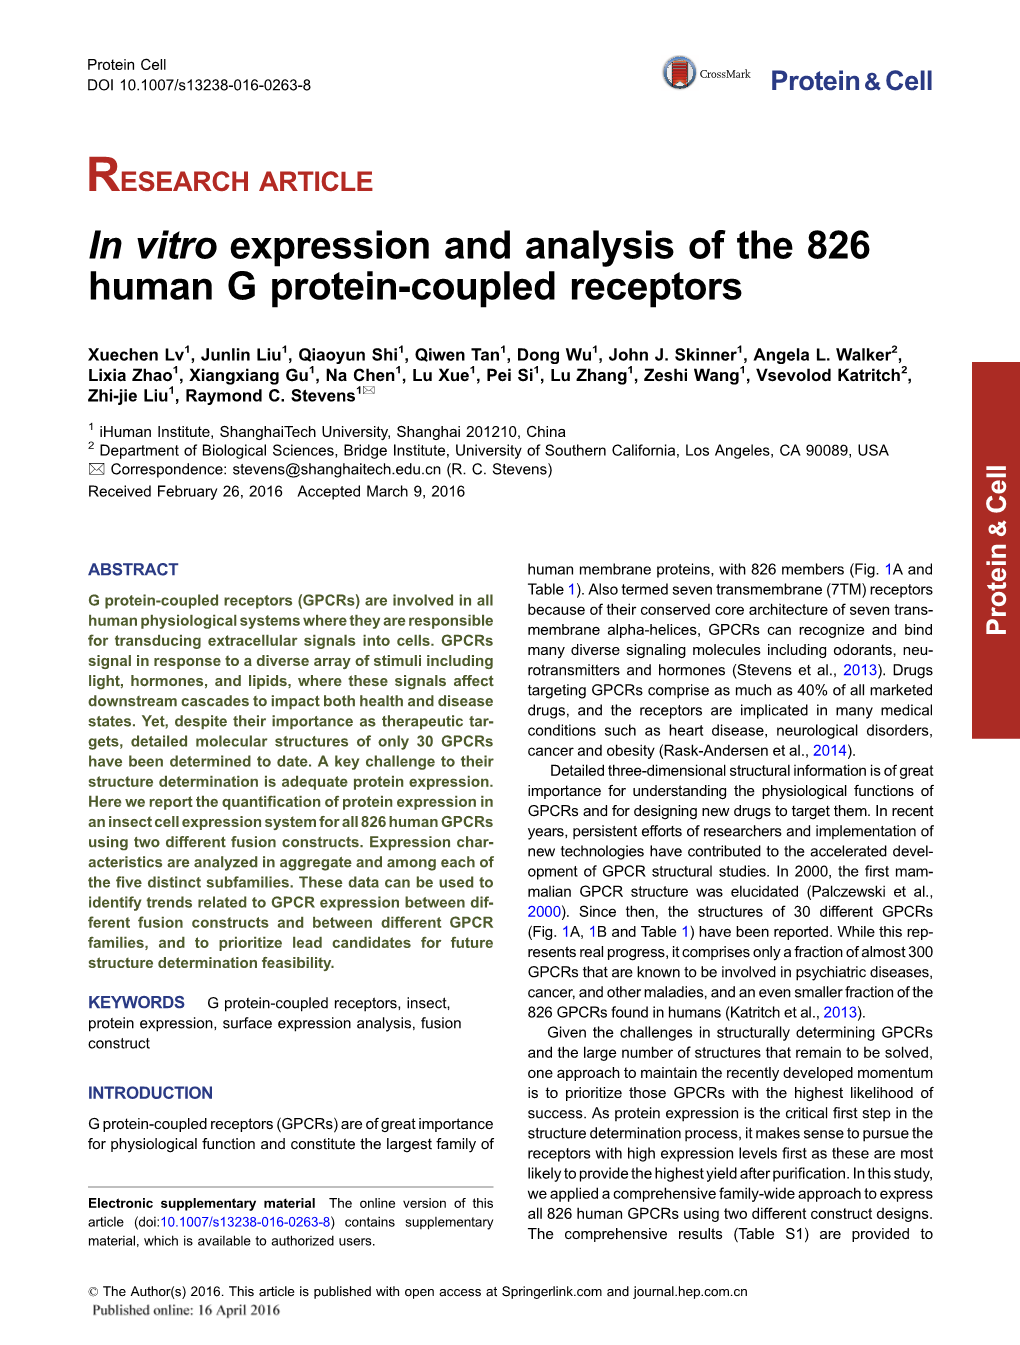 In Vitro Expression and Analysis of the 826 Human G Protein-Coupled Receptors